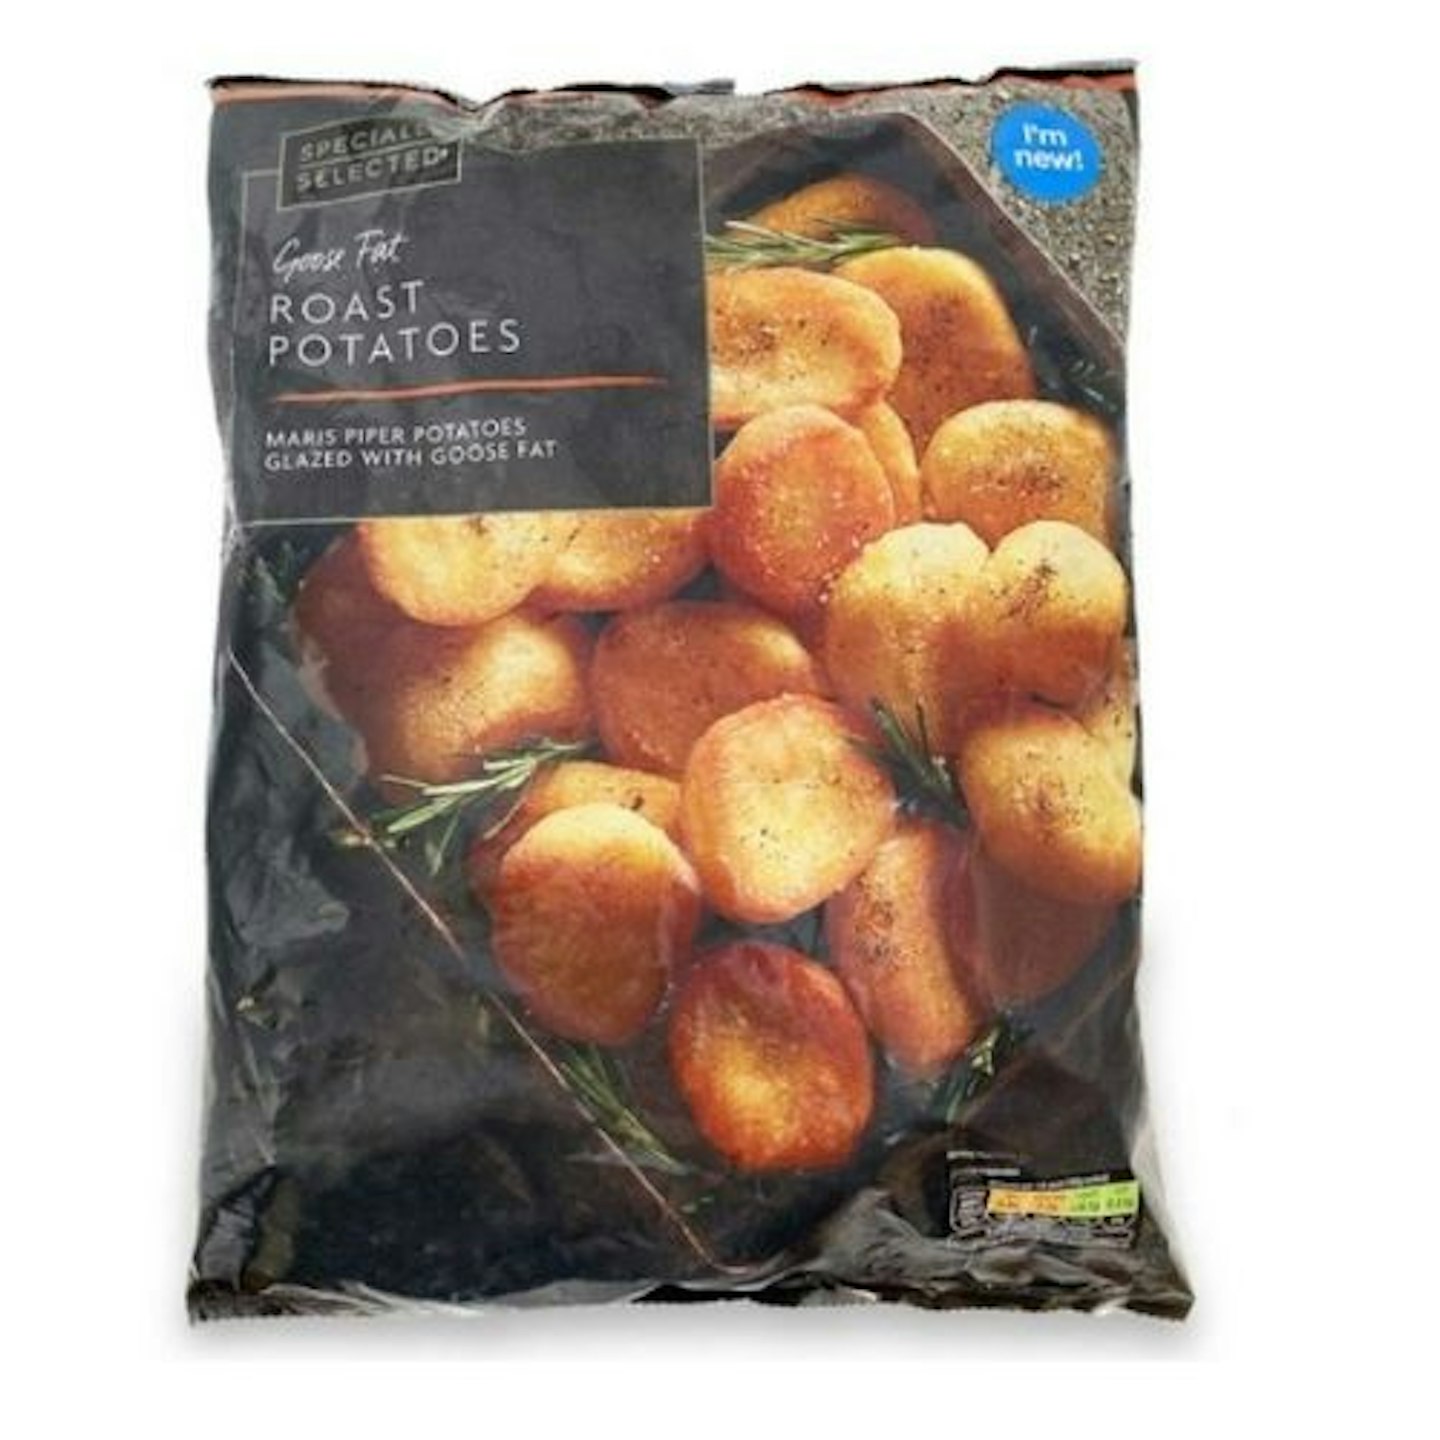 Specially Selected Goose Fat Roast Potatoes